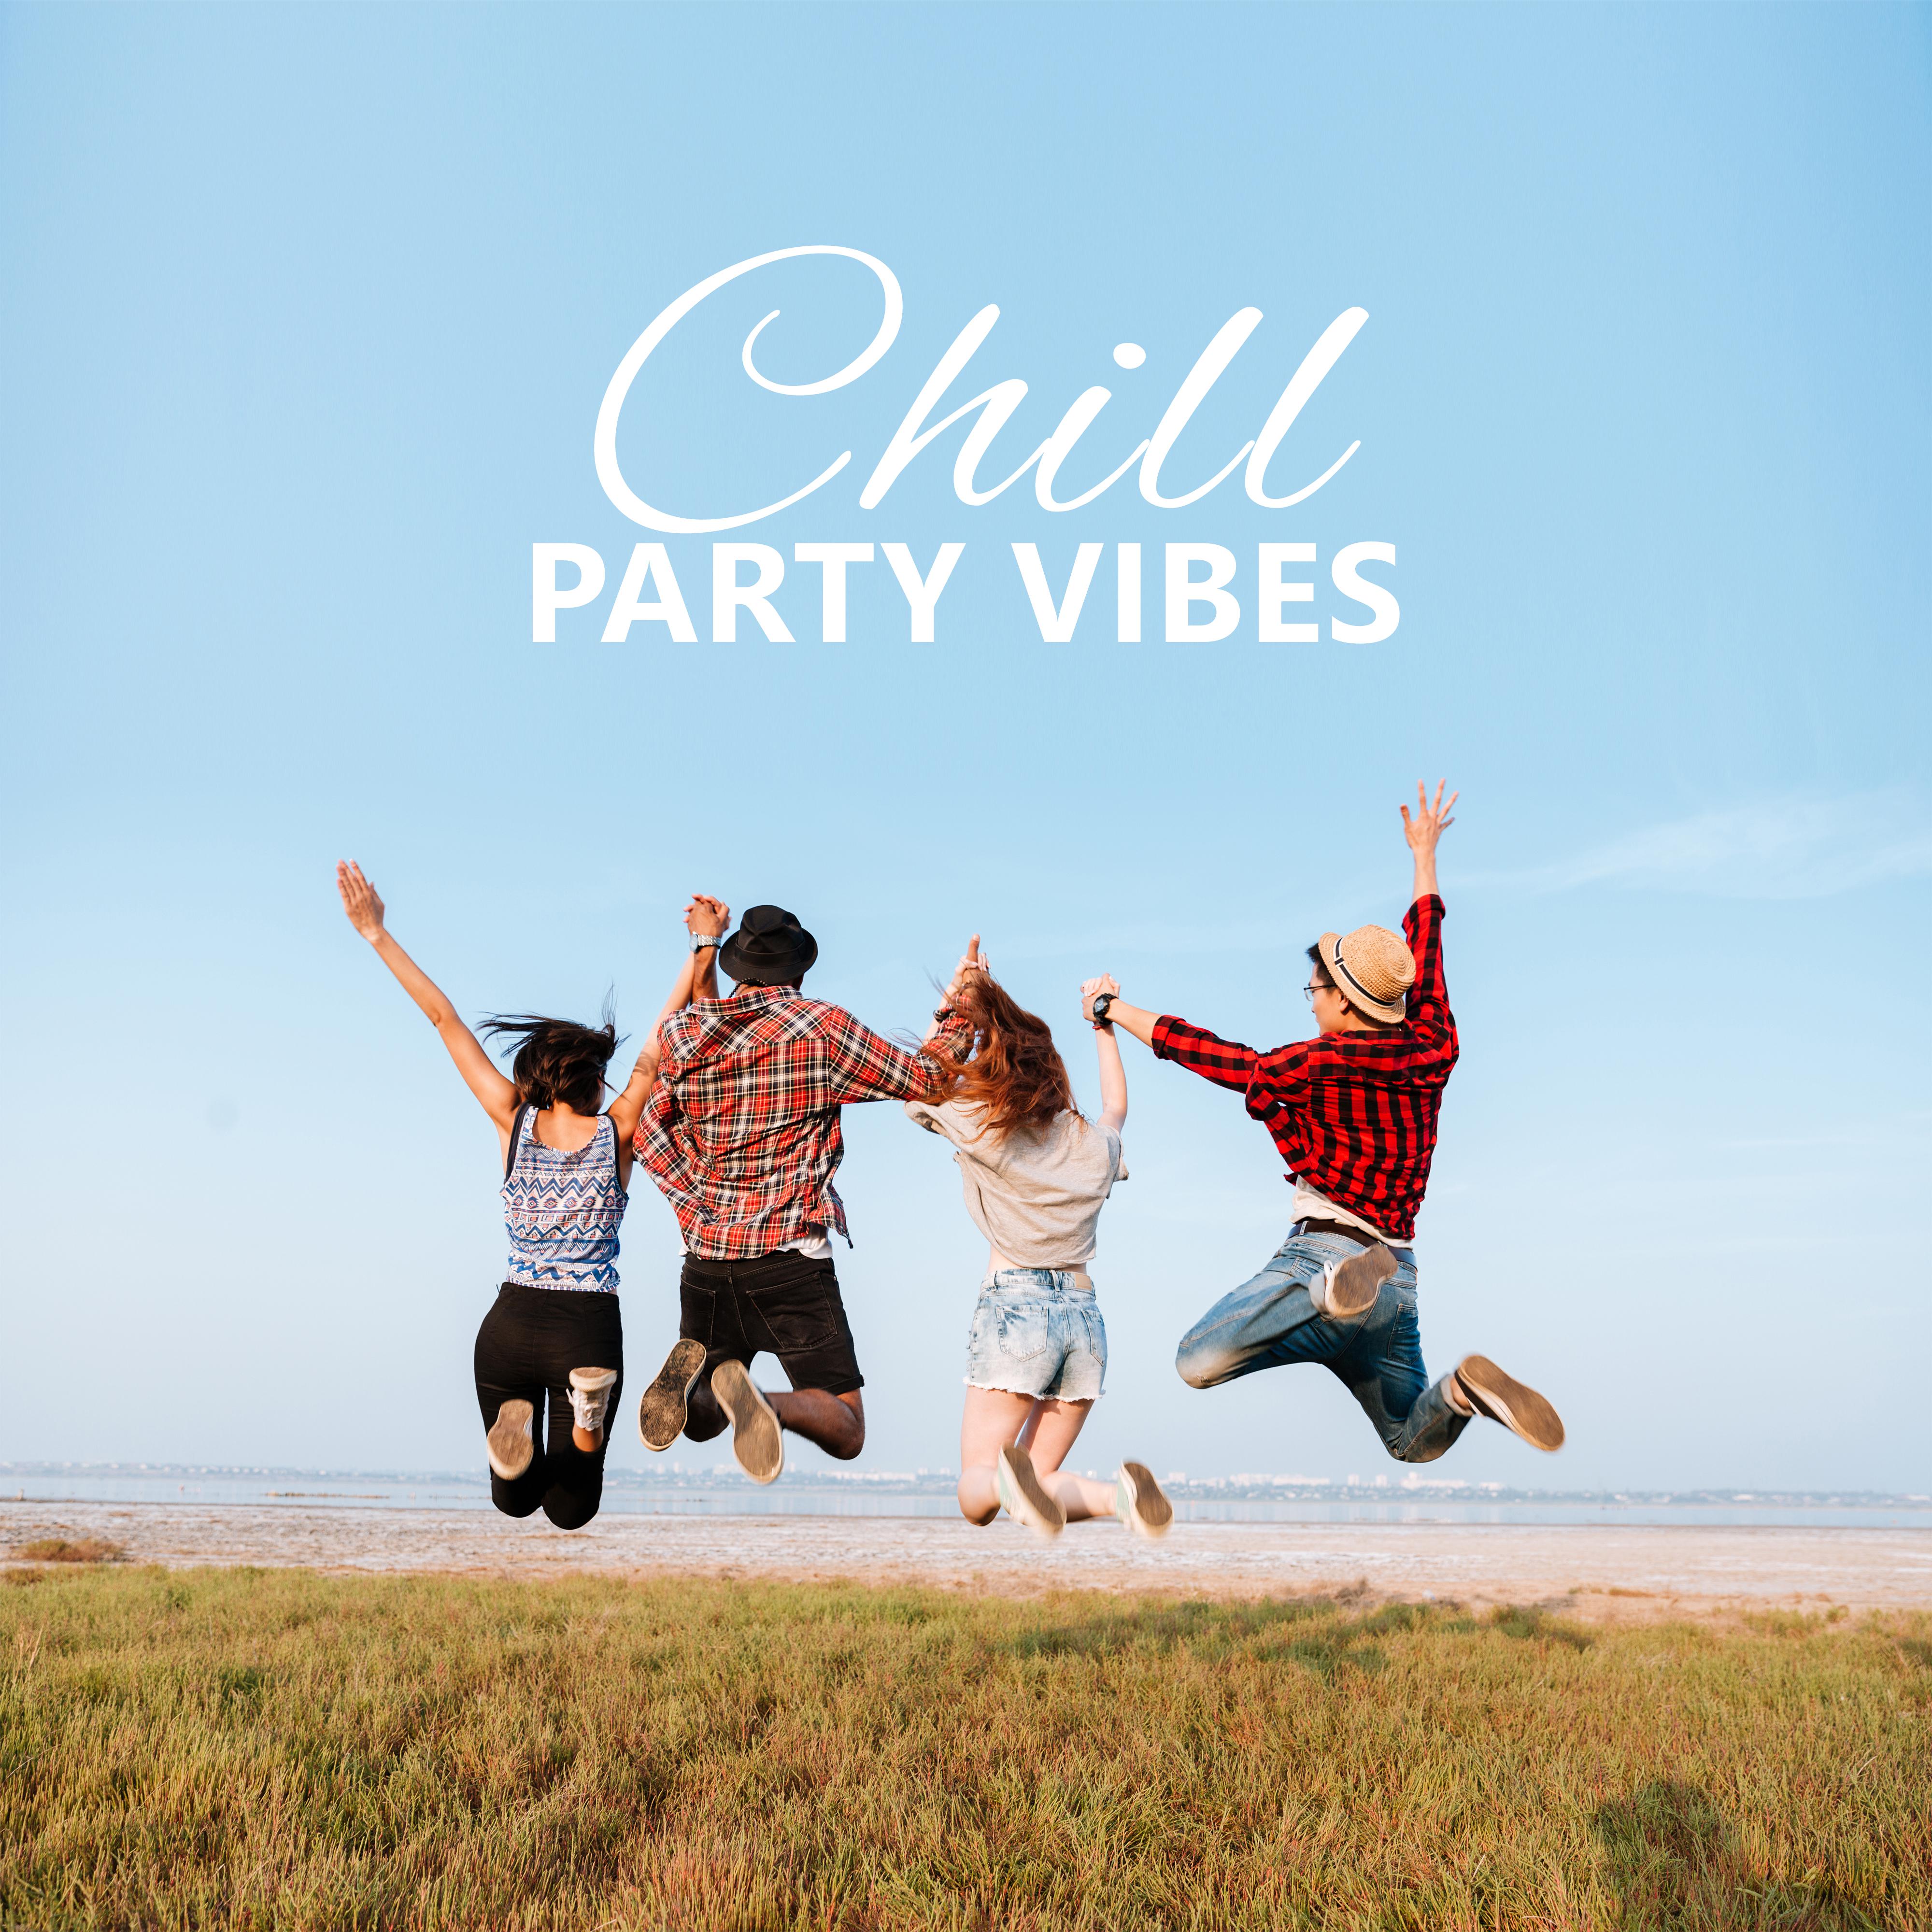 Chill Party Vibes  Ibiza Music, Beach Party Sounds, Cocktails  Drinks